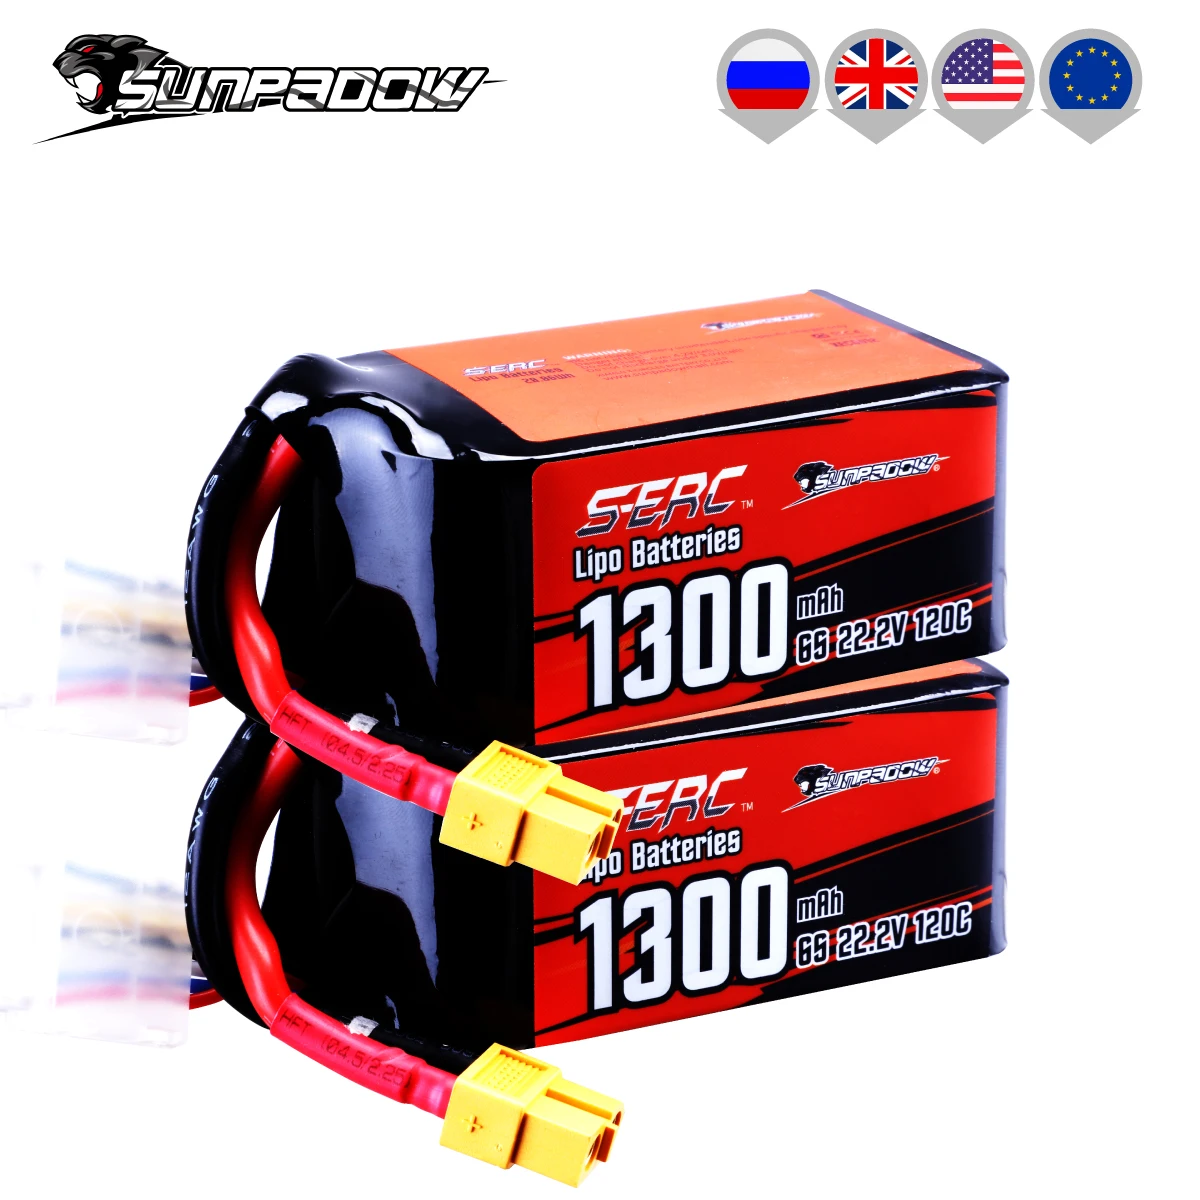 

SUNPADOW 6S 22.2V Lipo Battery 1300mAh 120C with XT60 Connector for RC FPV Quadcopter Airplane Helicopter Aircraft Racing 2 Pack